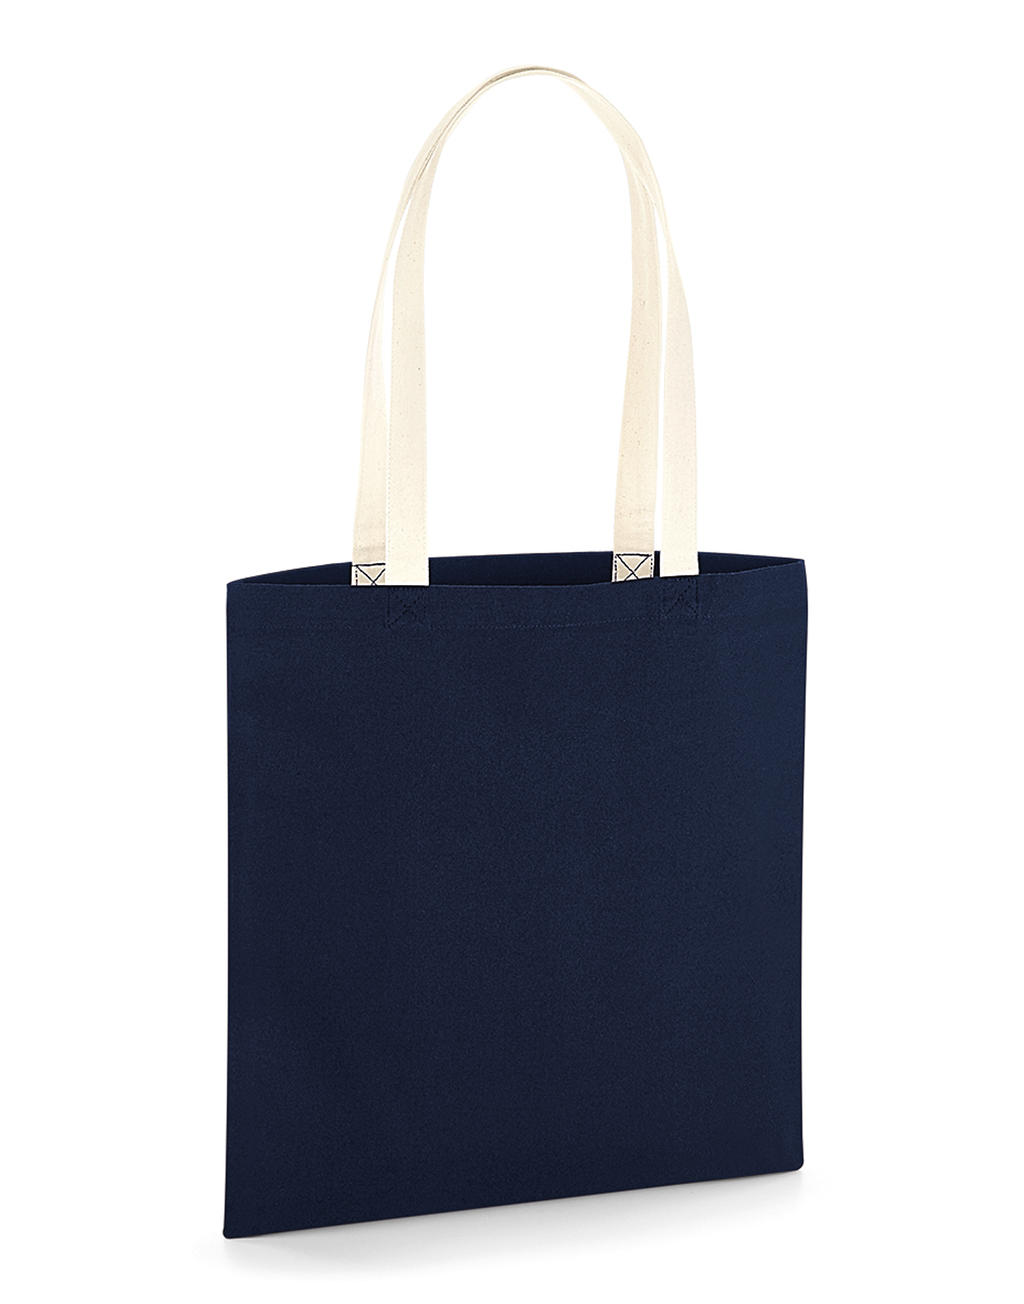  EarthAware? Organic Bag for Life - Contrast Handle in Farbe Natural/French Navy